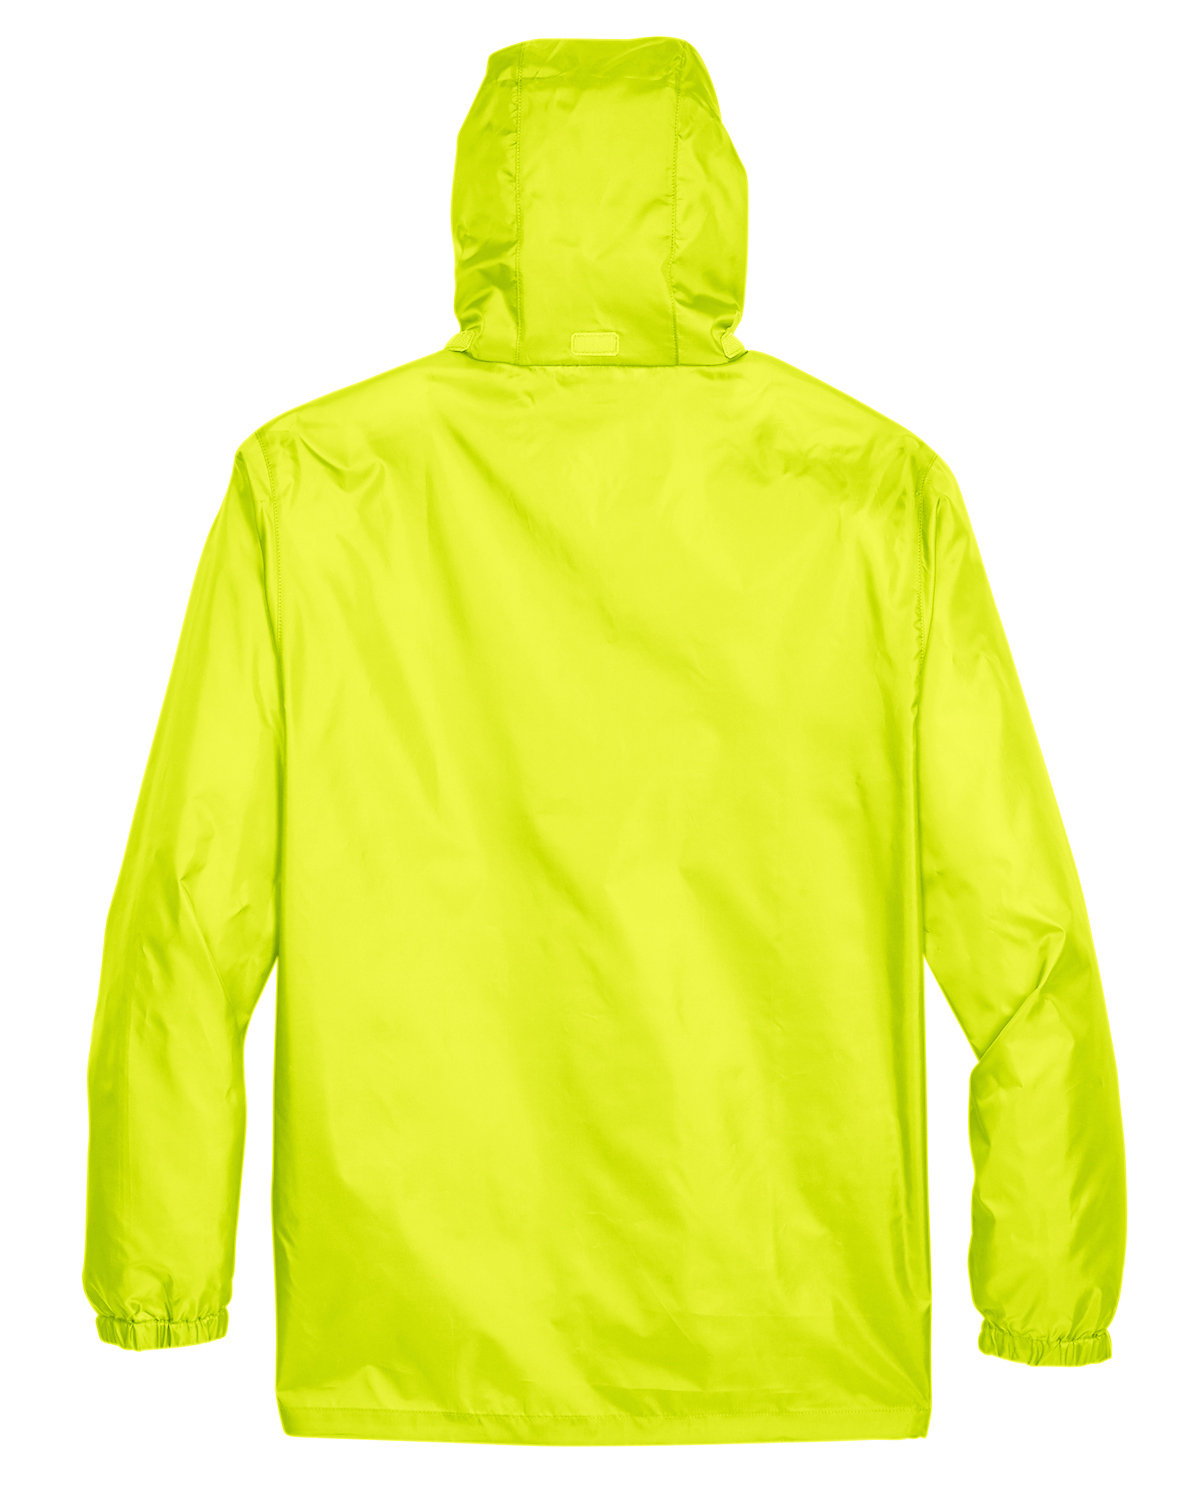 Team 365 Adult Zone Protect Lightweight Jacket | US Generic Non-Priced